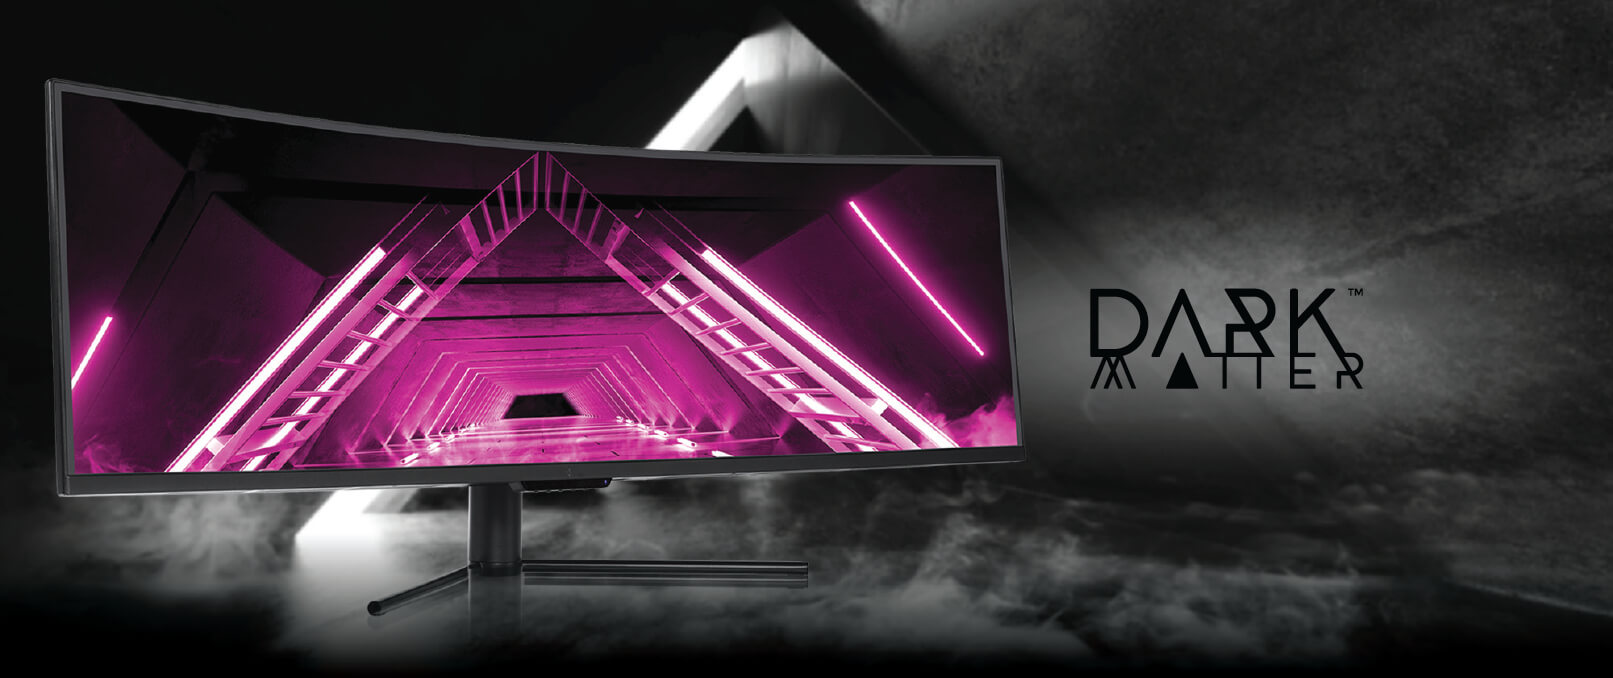 Dark Matter by Monoprice 49in Curved Gaming Monitor - 32:9, 1800R